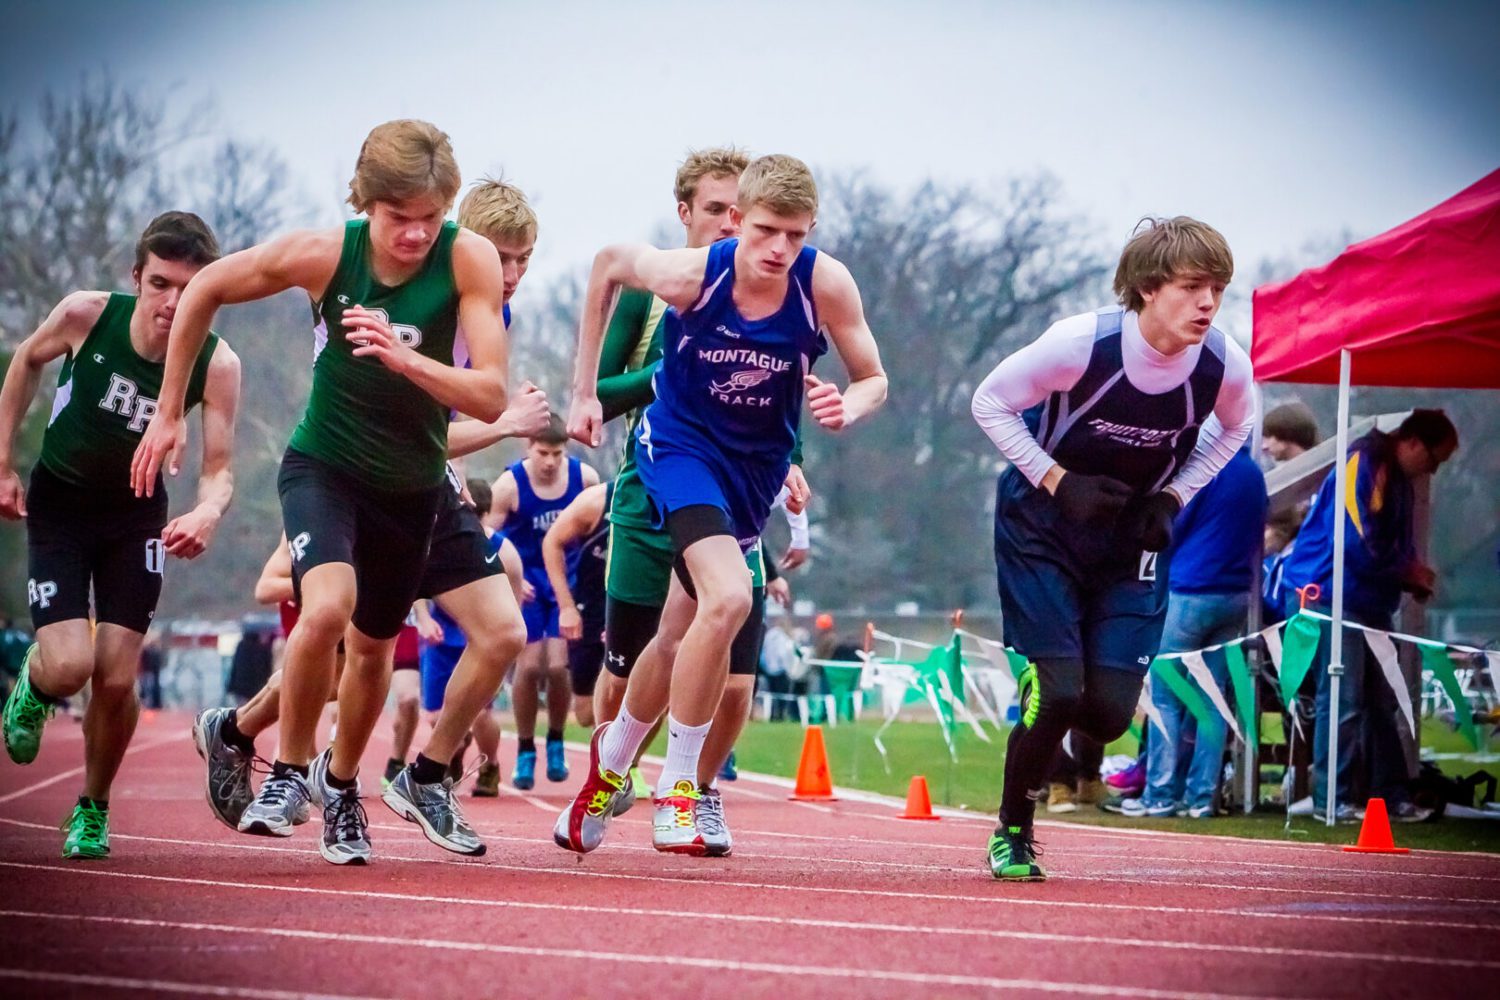 Video from GMAA city track meet